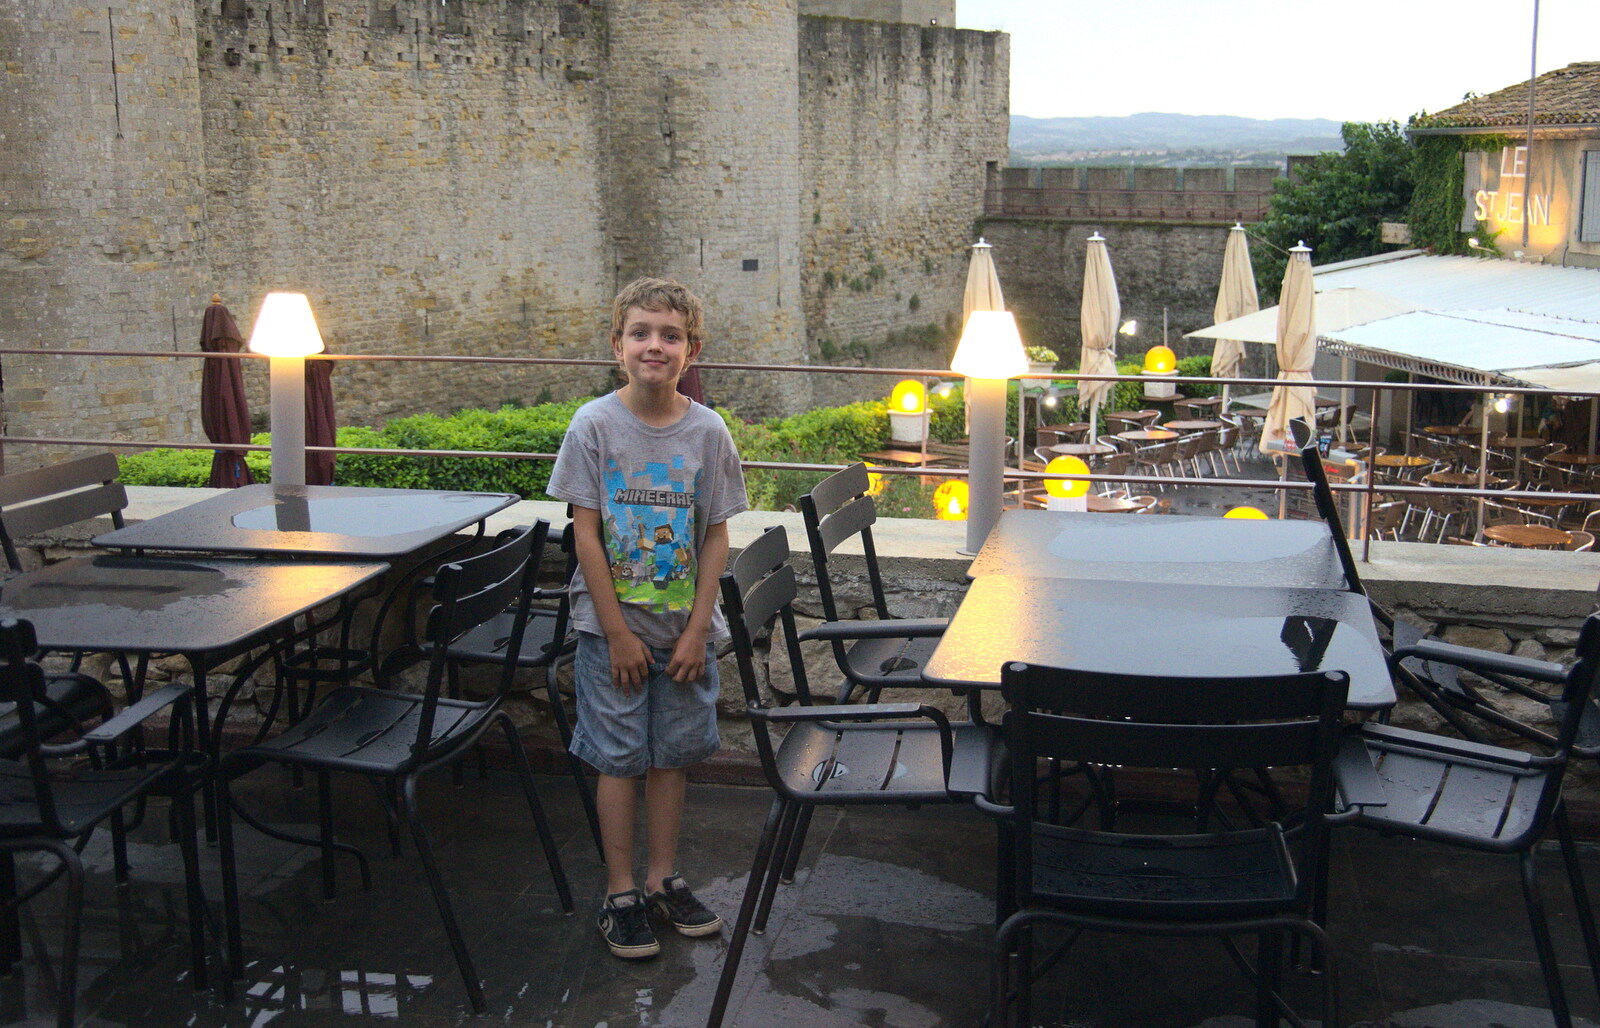 Fred stands on the balcony from A Trip to Carcassonne, Aude, France - 8th August 2018